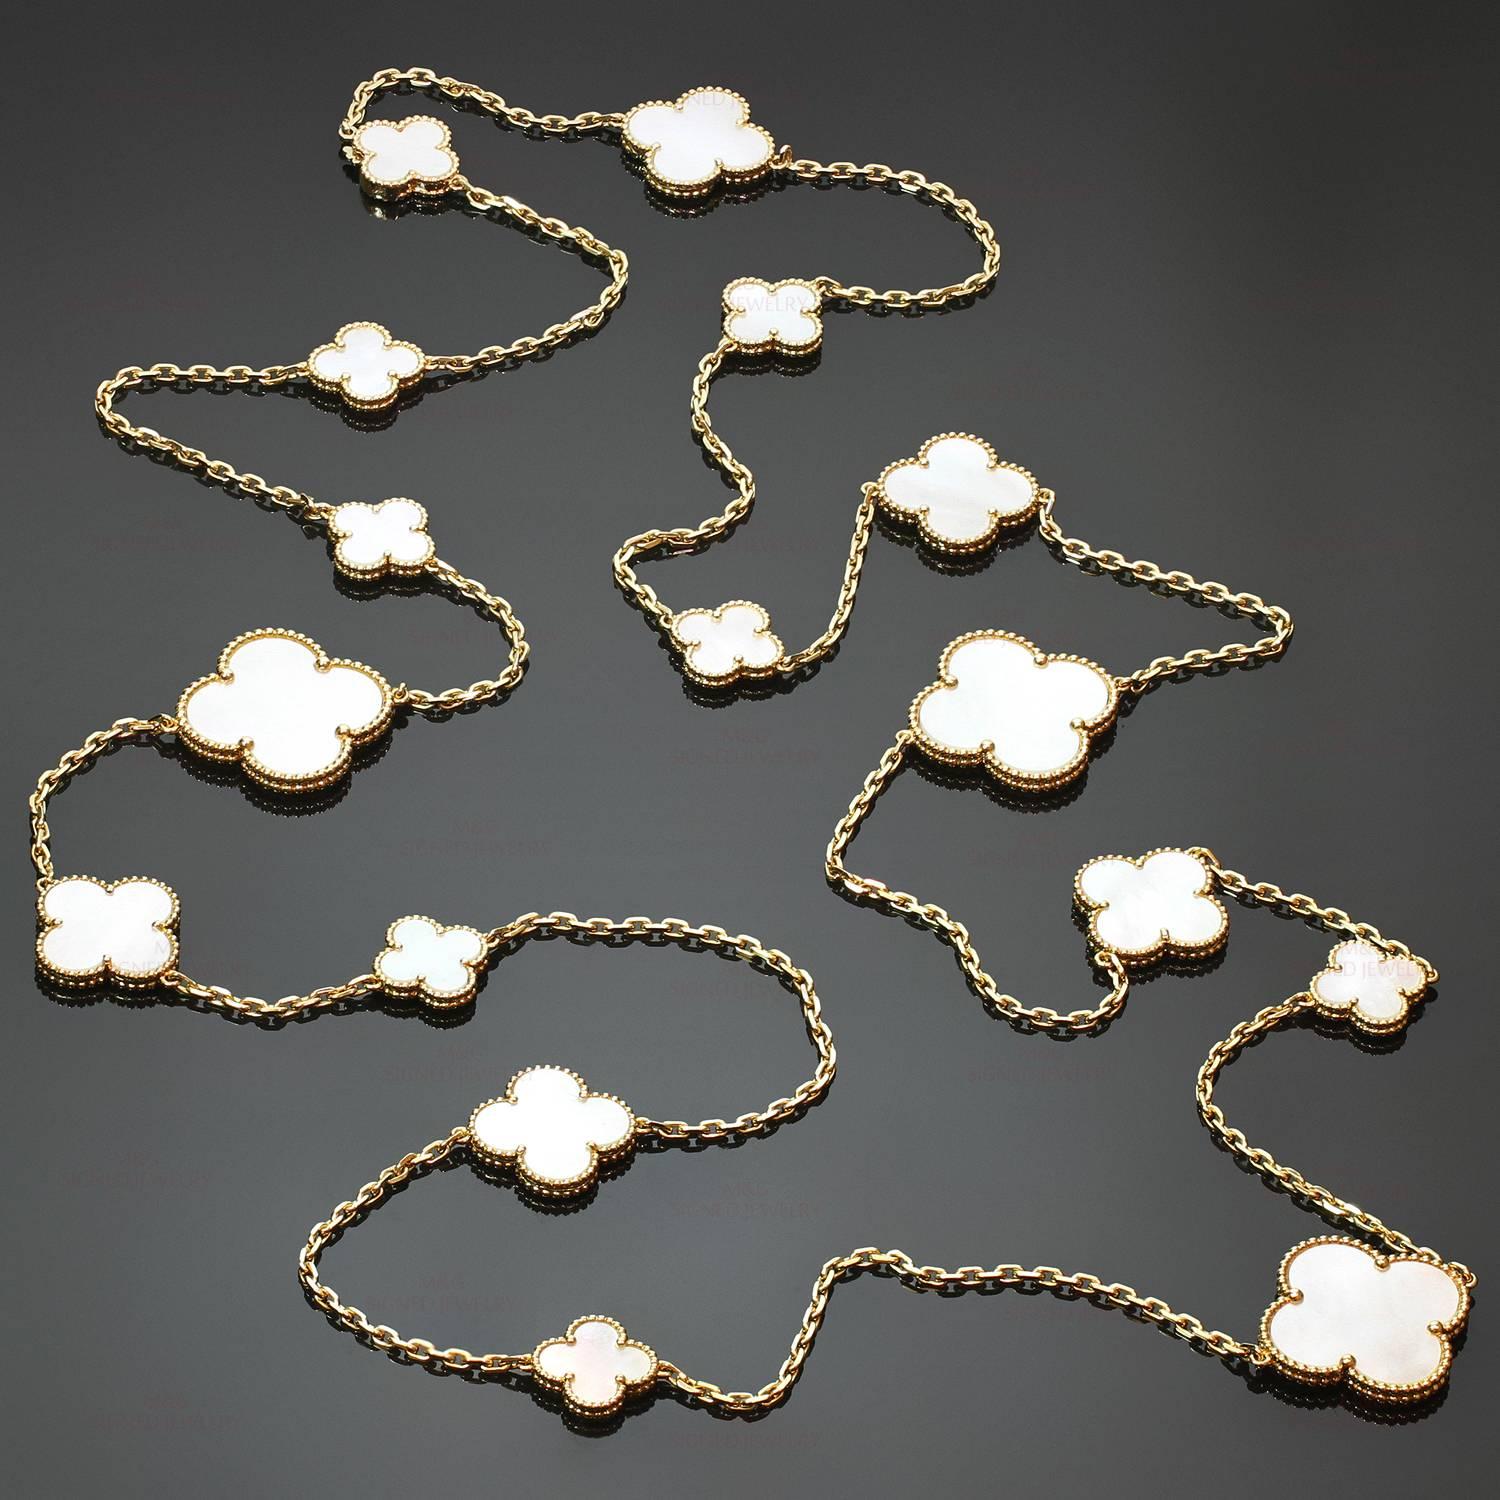 This elegant Van Cleef & Arpels necklace from the Magic Alhambra collection is crafted in 18k yellow gold and beautifully accented with eleven 15.0mm to 33.0mm mother-of-pearl lucky clover motifs. Made in France circa 2011. Measurements: 33.5